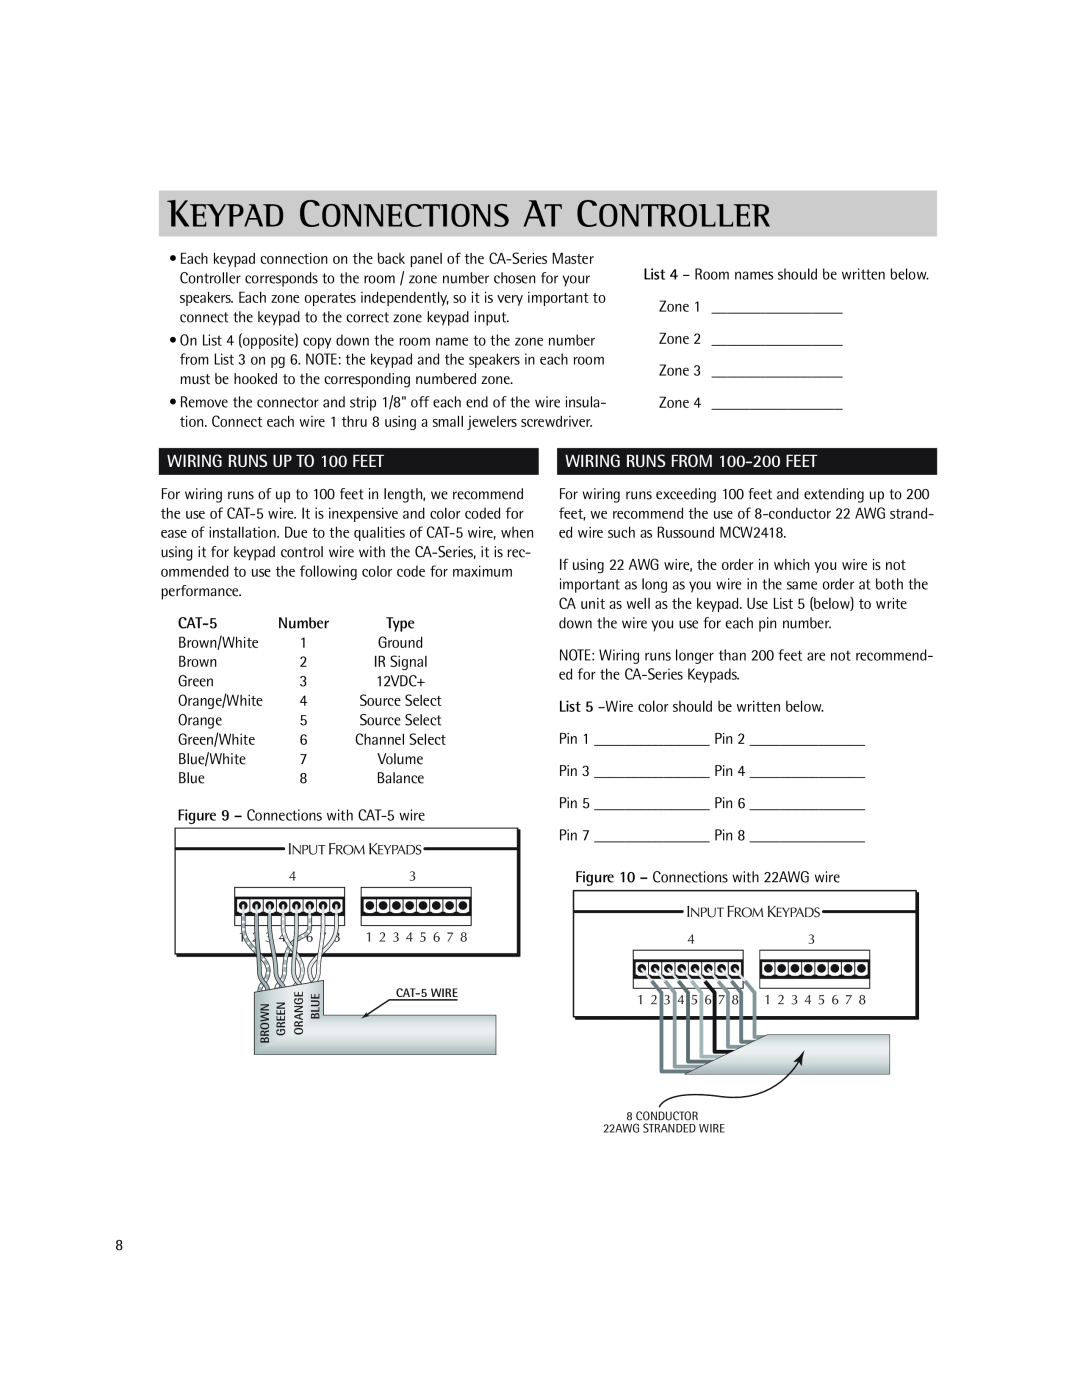 Russound CA-Series instruction manual Keypad Connections At Controller, WIRING RUNS UP TO 100 FEET 